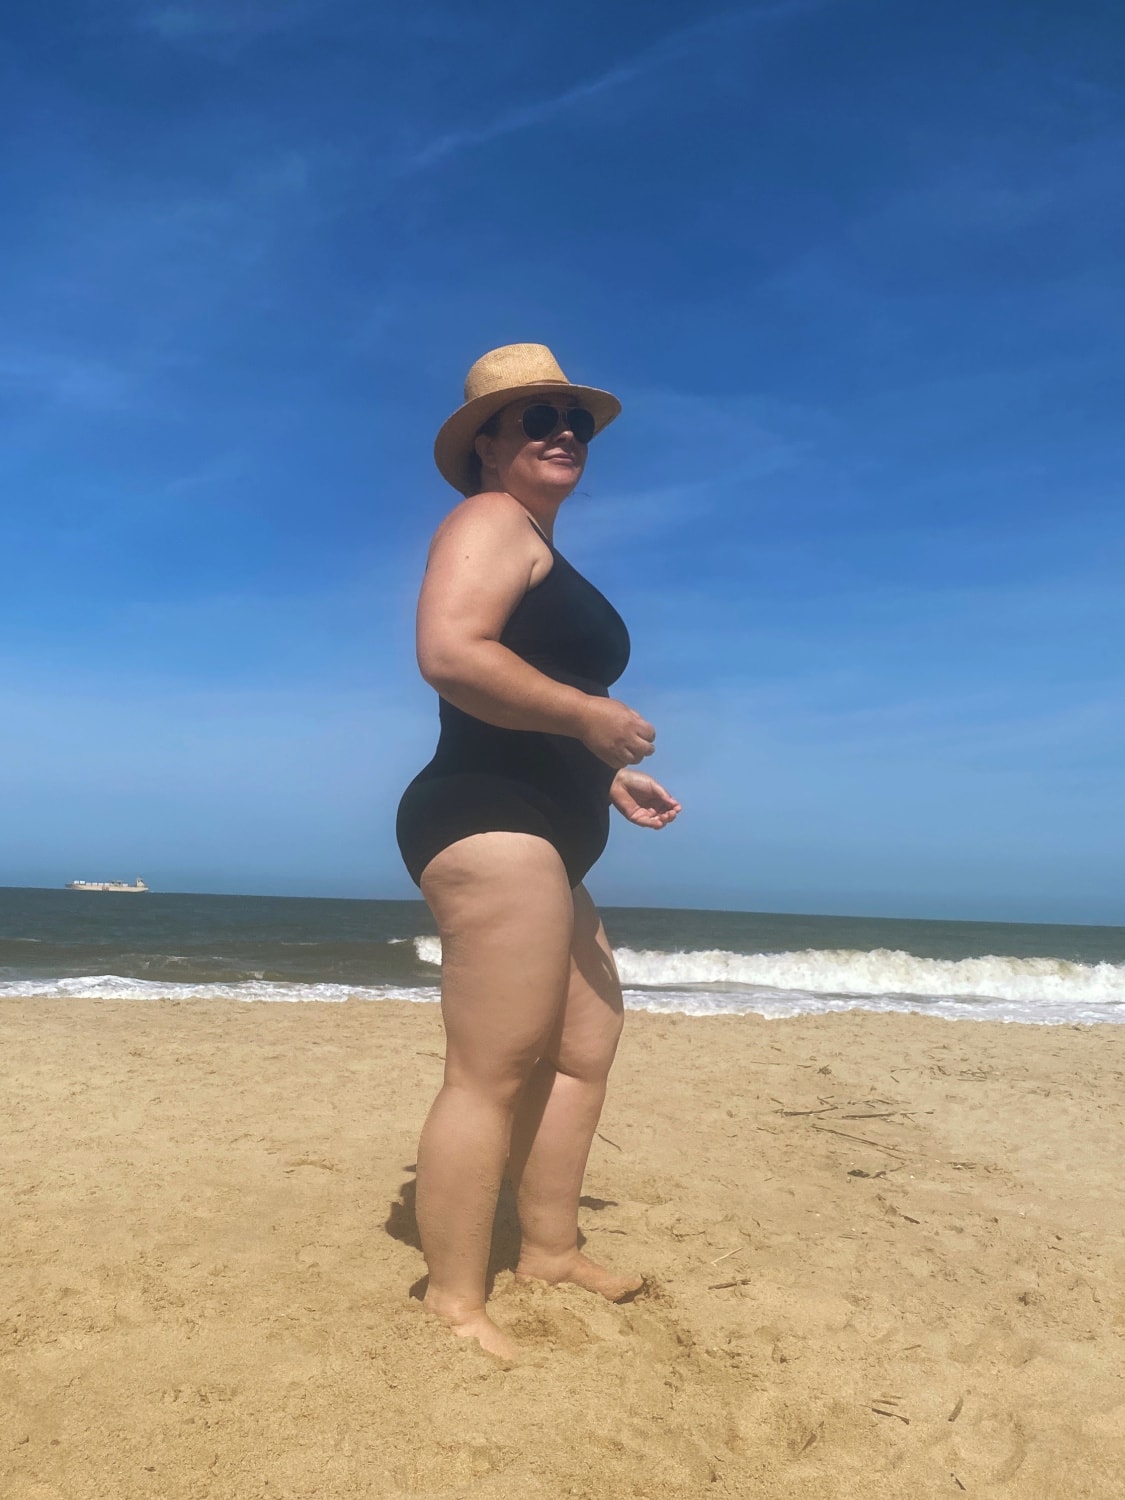 IMO the Best Swimsuit for Women Over 40